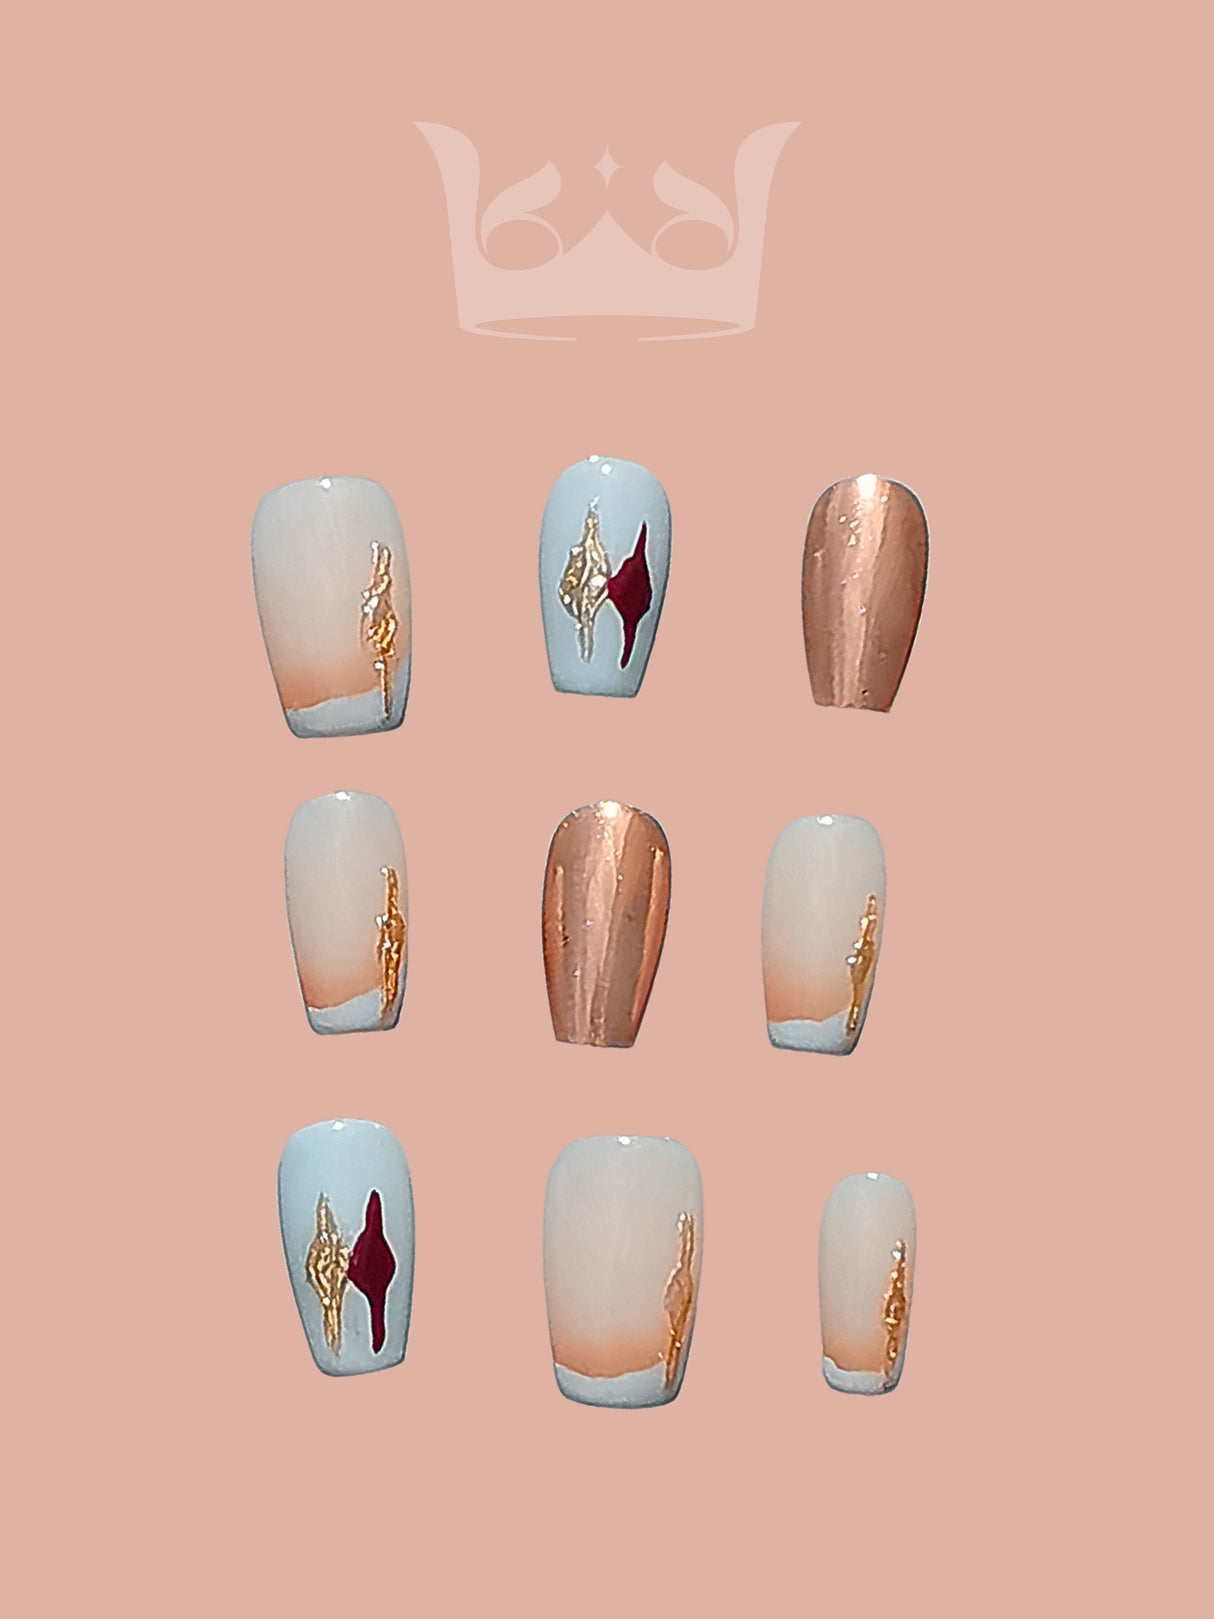 These press-on nails are perfect for adding glamour to an outfit or special occasion. Featuring French manicure style, gold accents, metallic rose gold finish, and unique designs.